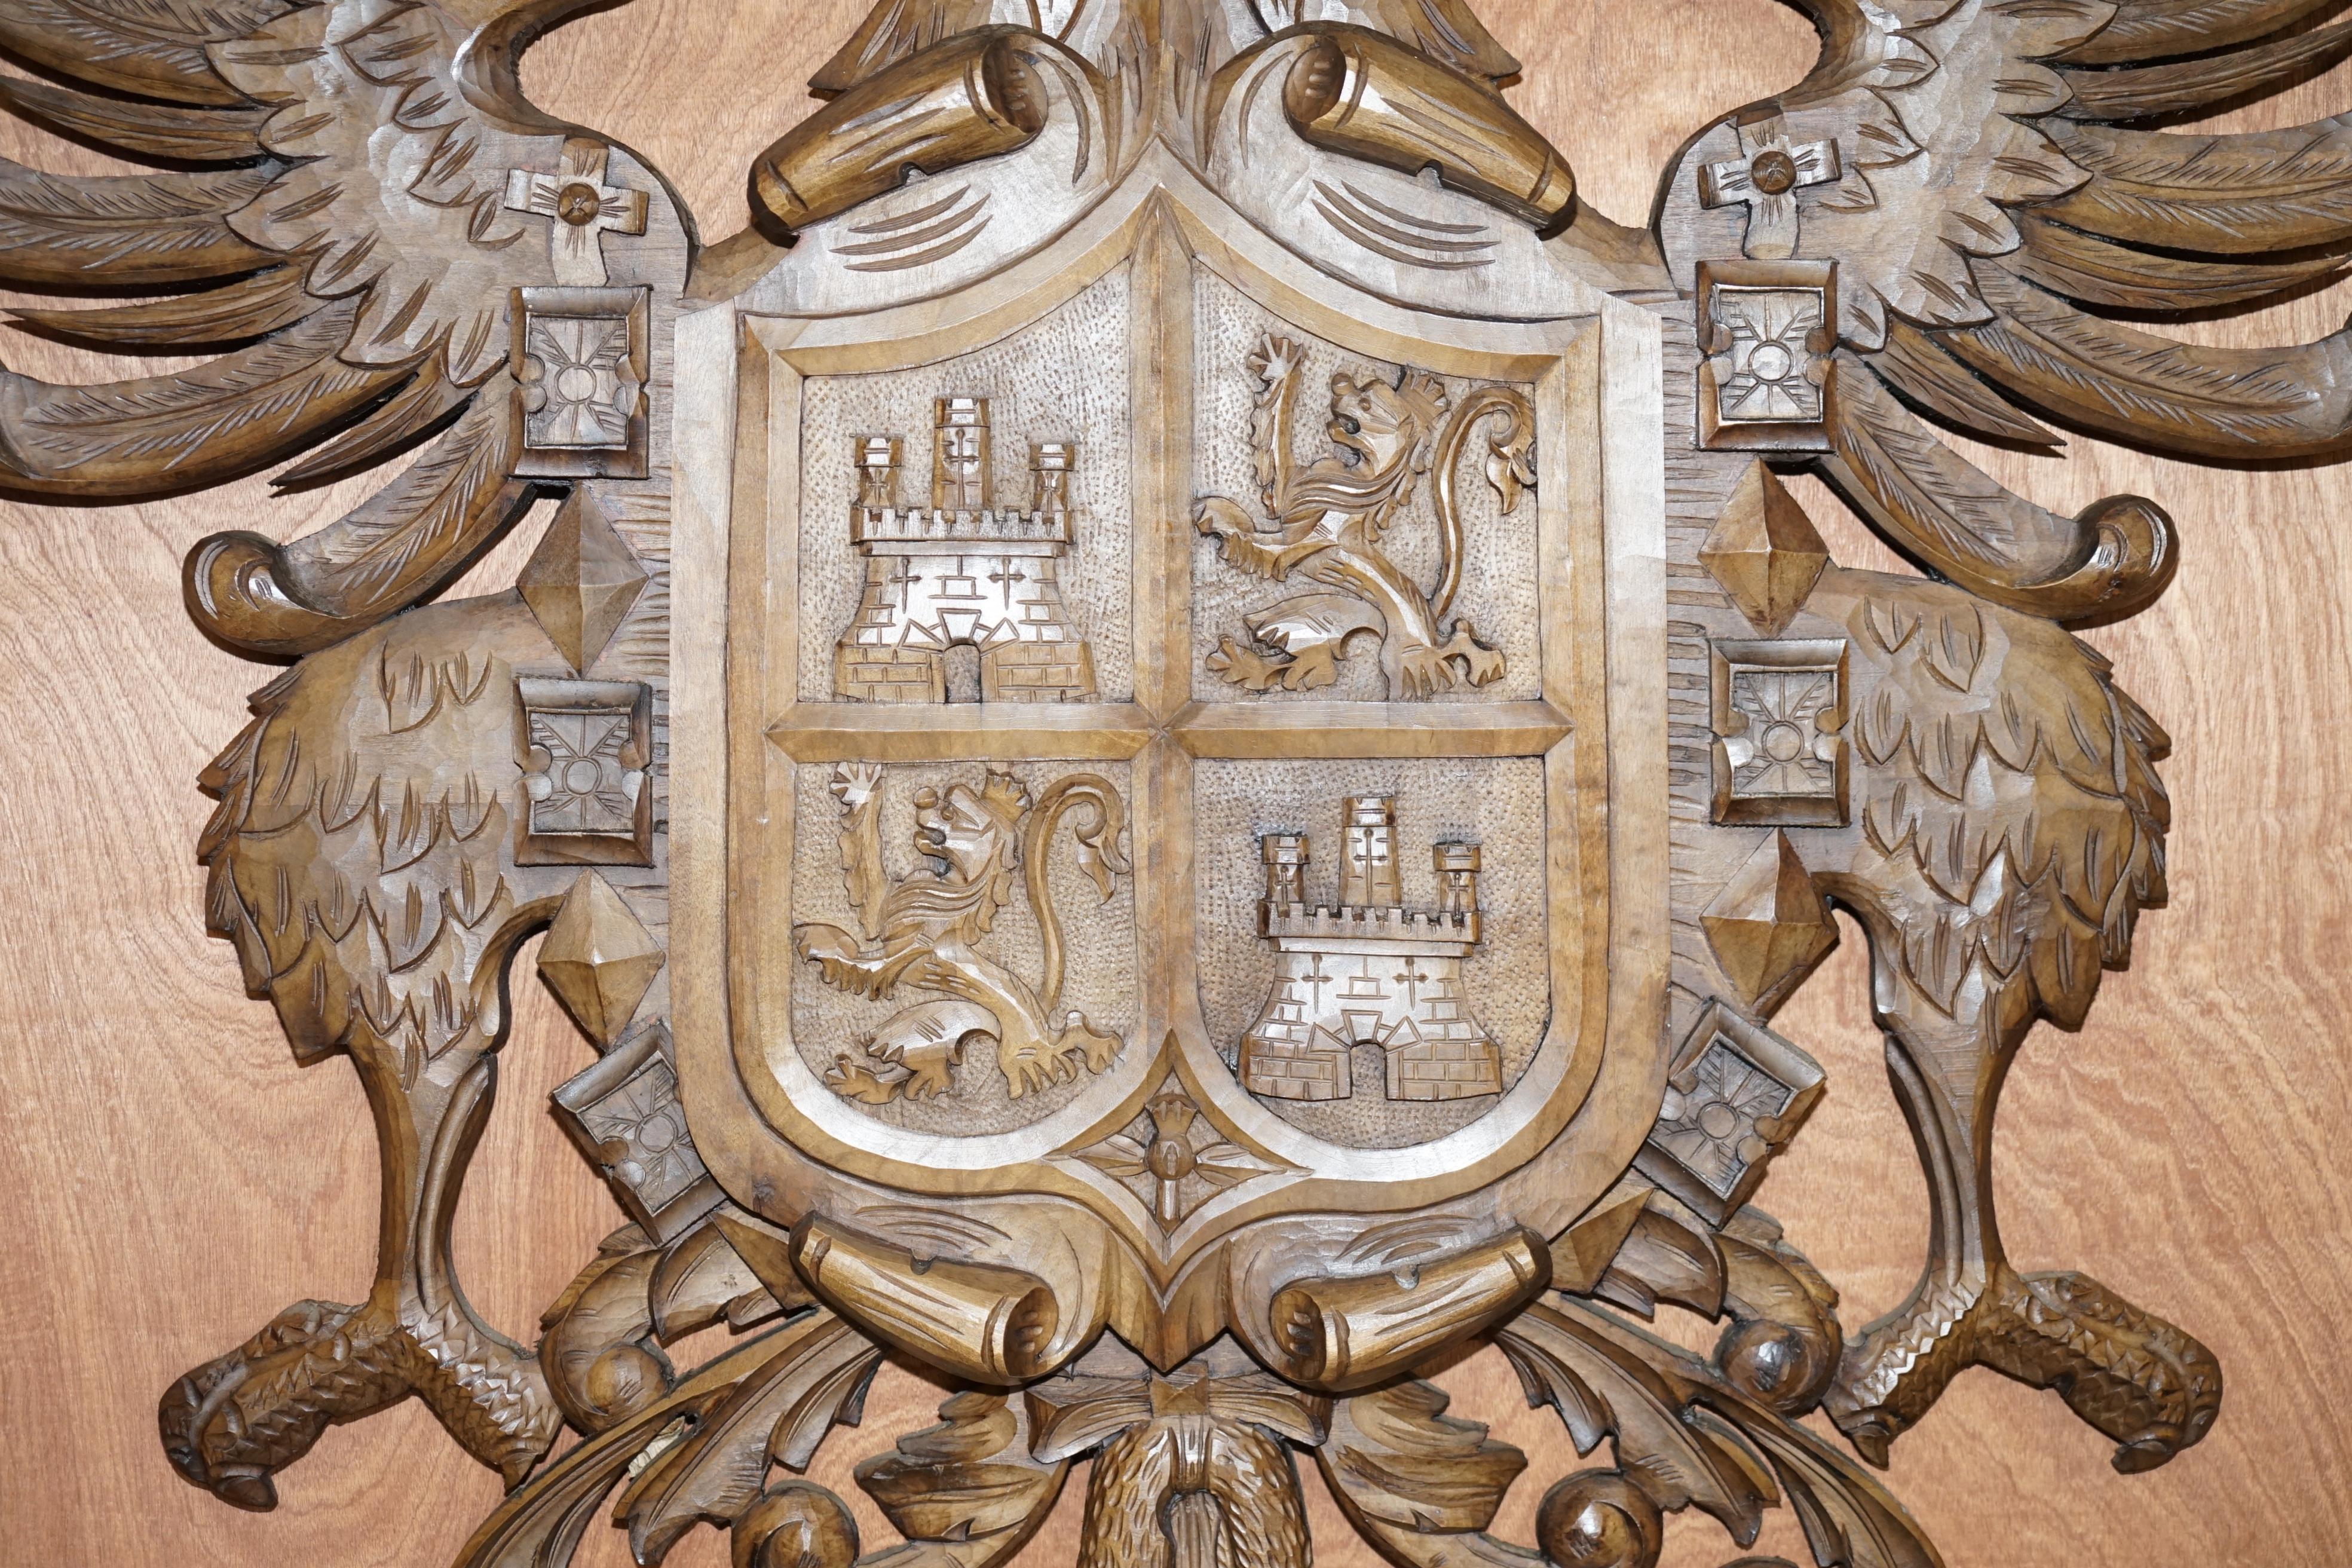 We are delighted to offer this very large and ornate Heraldic Armorial crest or Coat of arms

Please note the delivery fee listed is just a guide, it covers within the M25 only for the UK and local Europe only for international

This is the